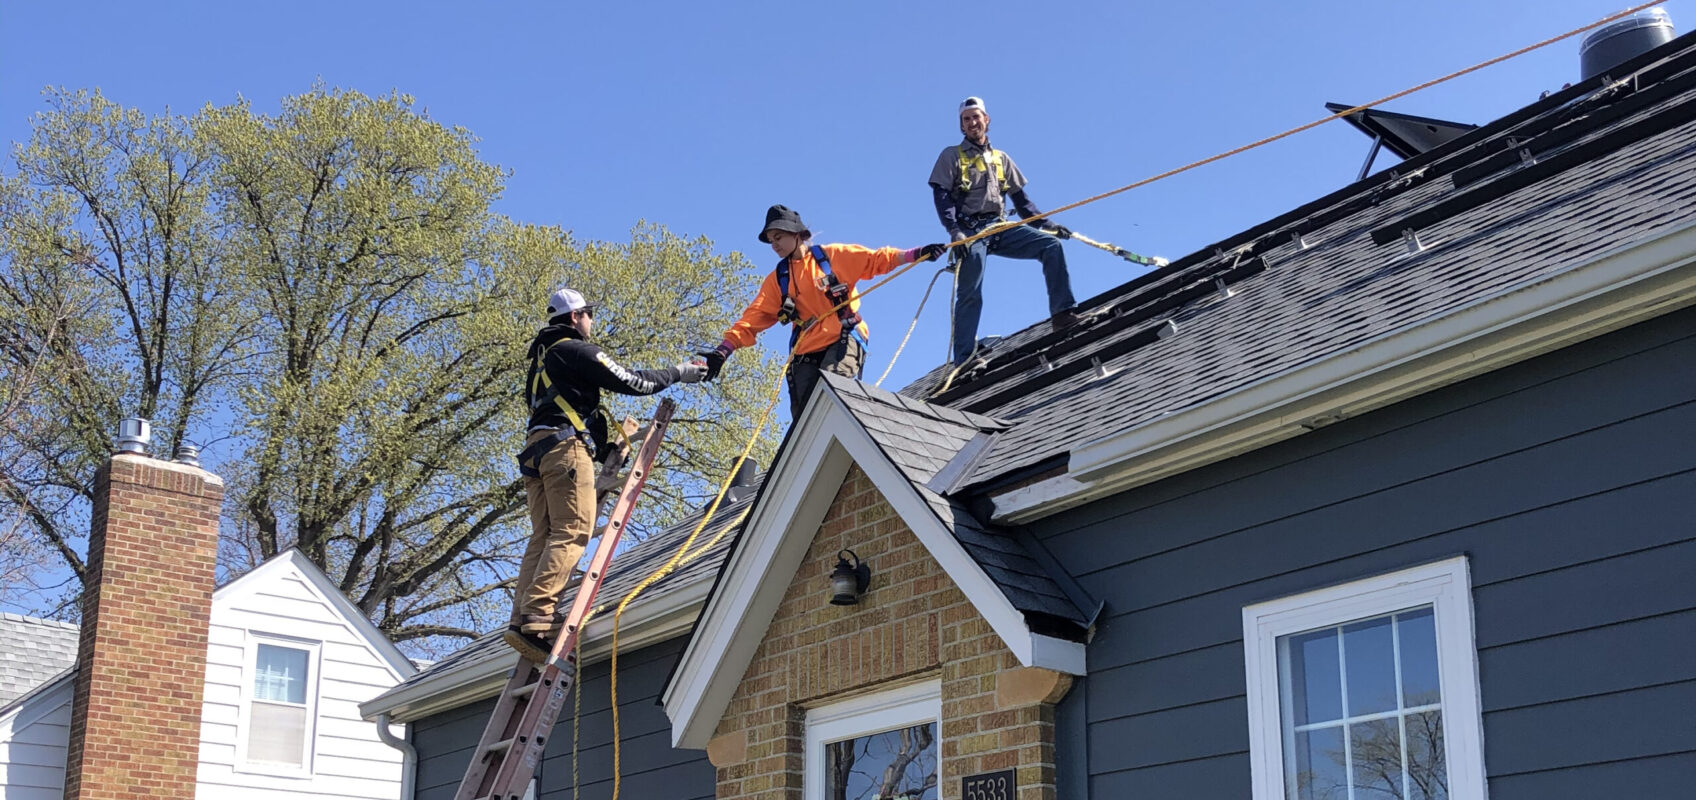 Minnesota solar installer bankruptcies leave unfinished projects, calls for better oversight